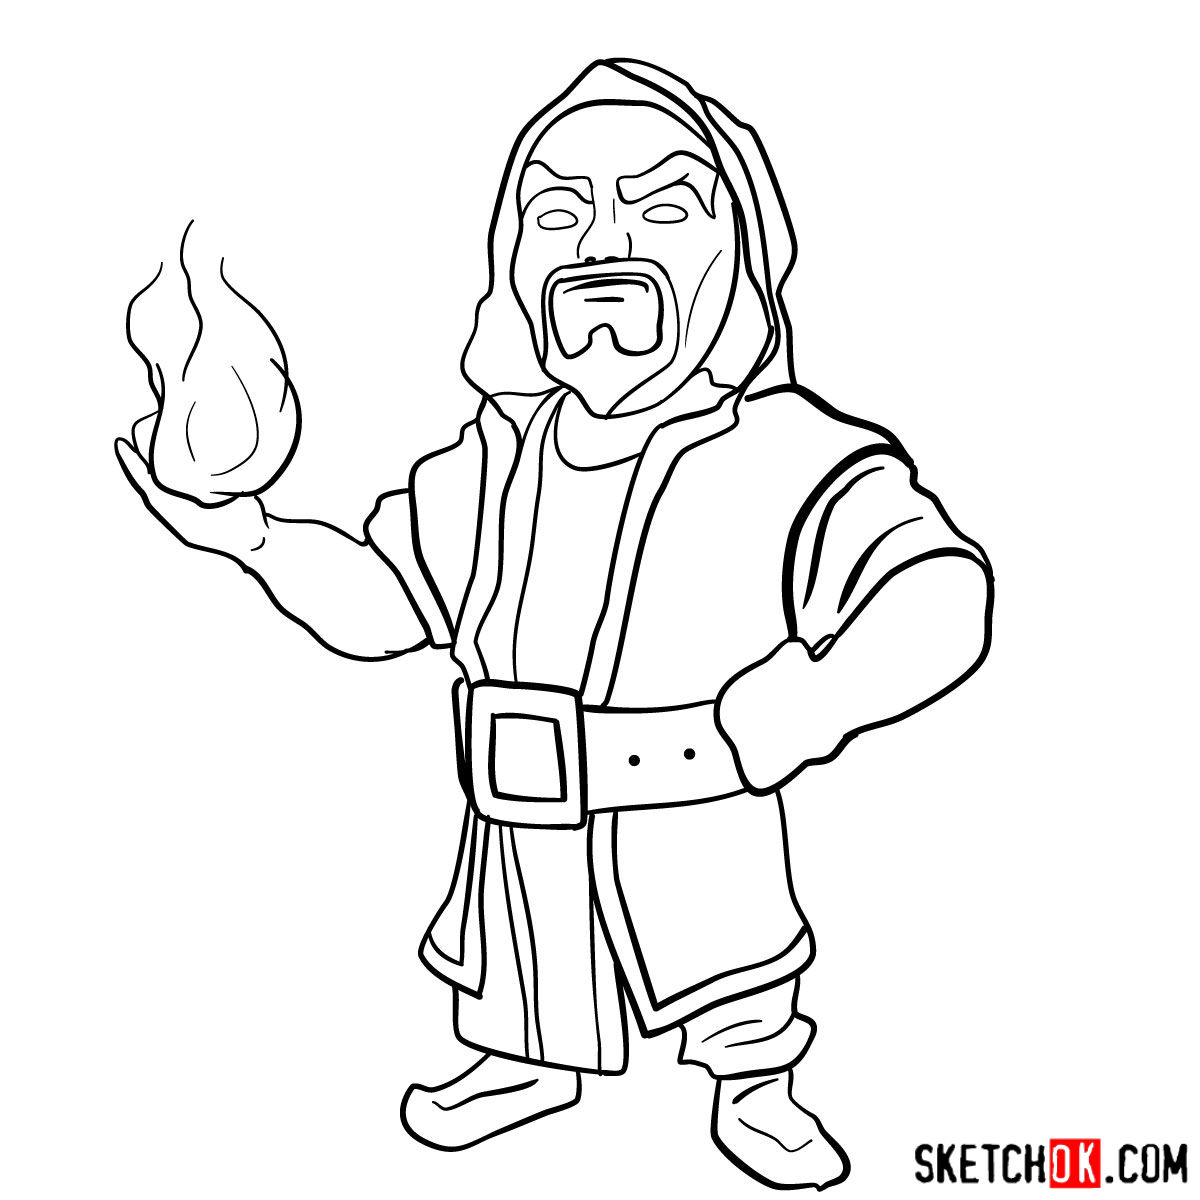 How to draw Wizard from Clash of Clans - step 12